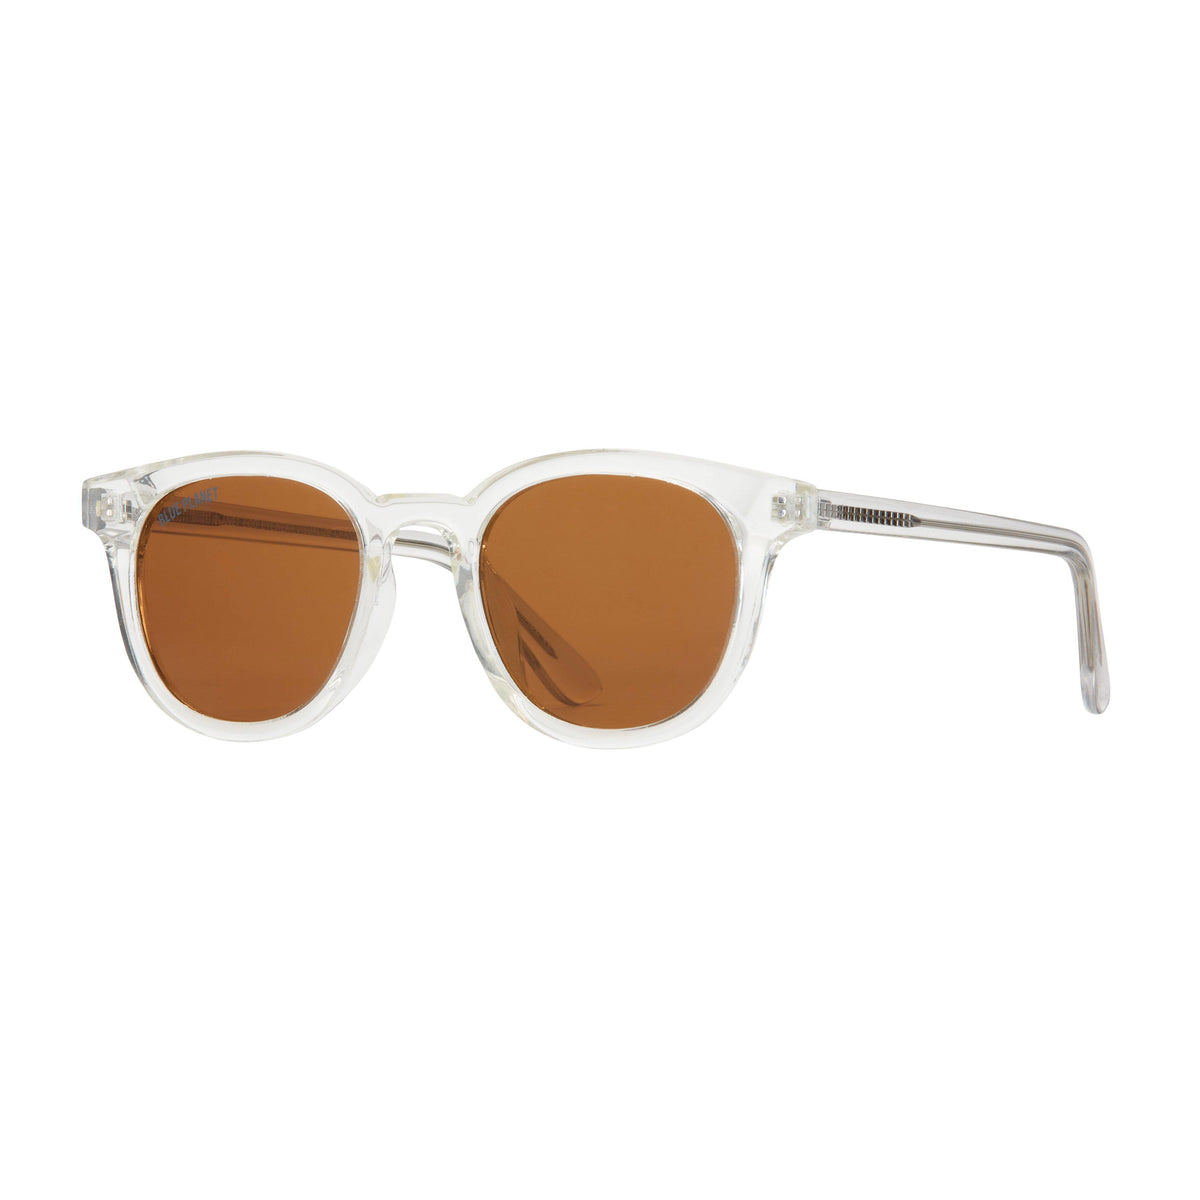 Gram Sunglasses in Crystal Clear Brown with Brown Polarized Lens--Lemons and Limes Boutique